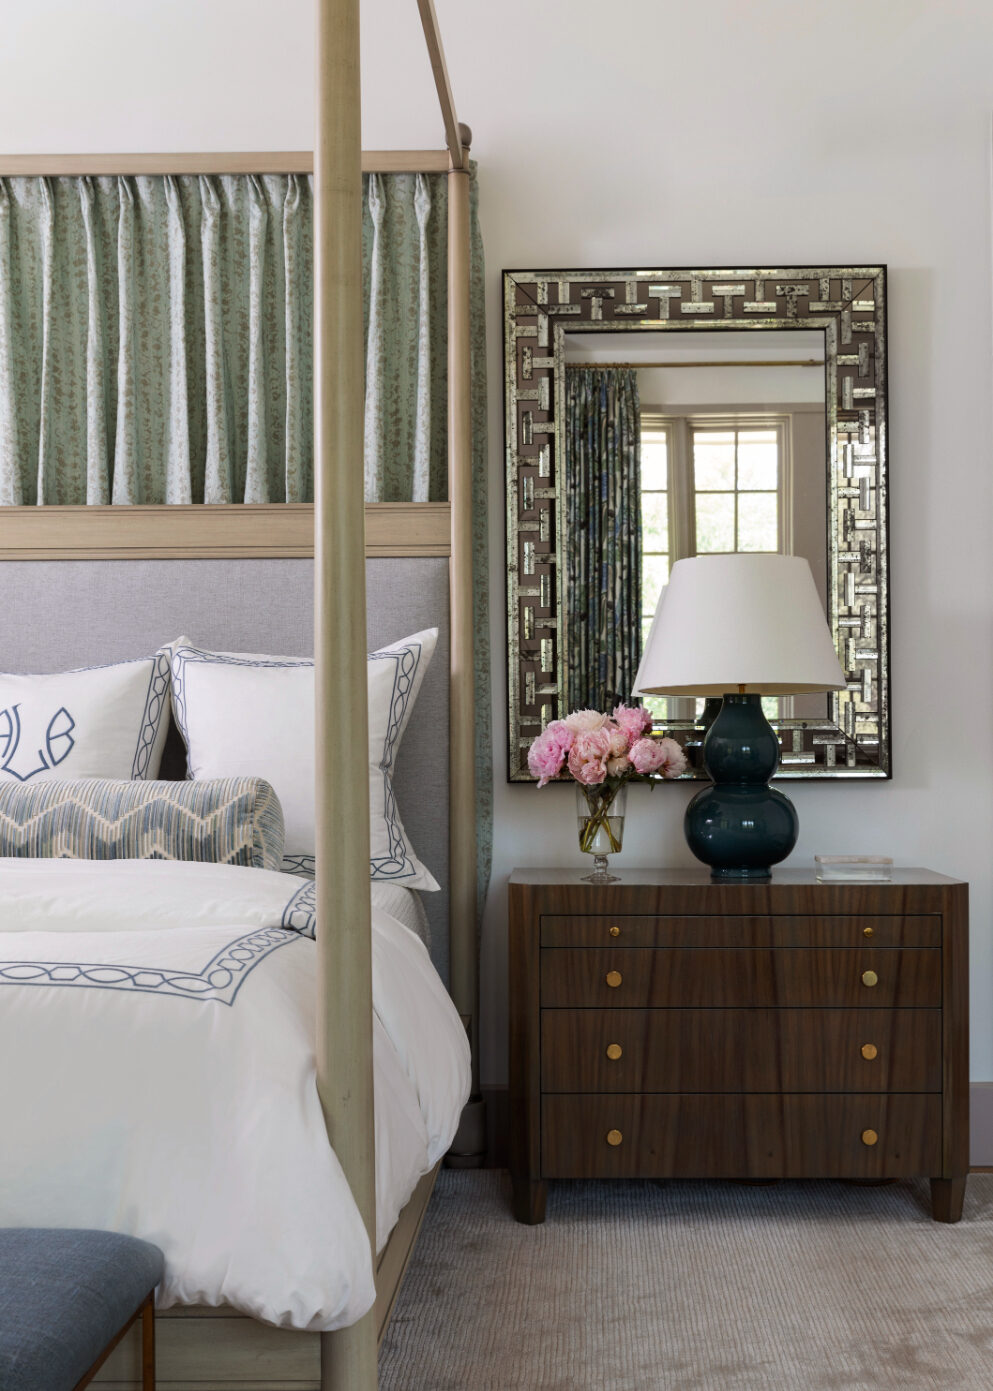 “The whole thing is so plush,” Epley says of the primary bedroom, where the king bed by The Joseph Company is dressed in bespoke Matouk linens with custom embroidery from the Longoria Collection. JULIE SOEFER